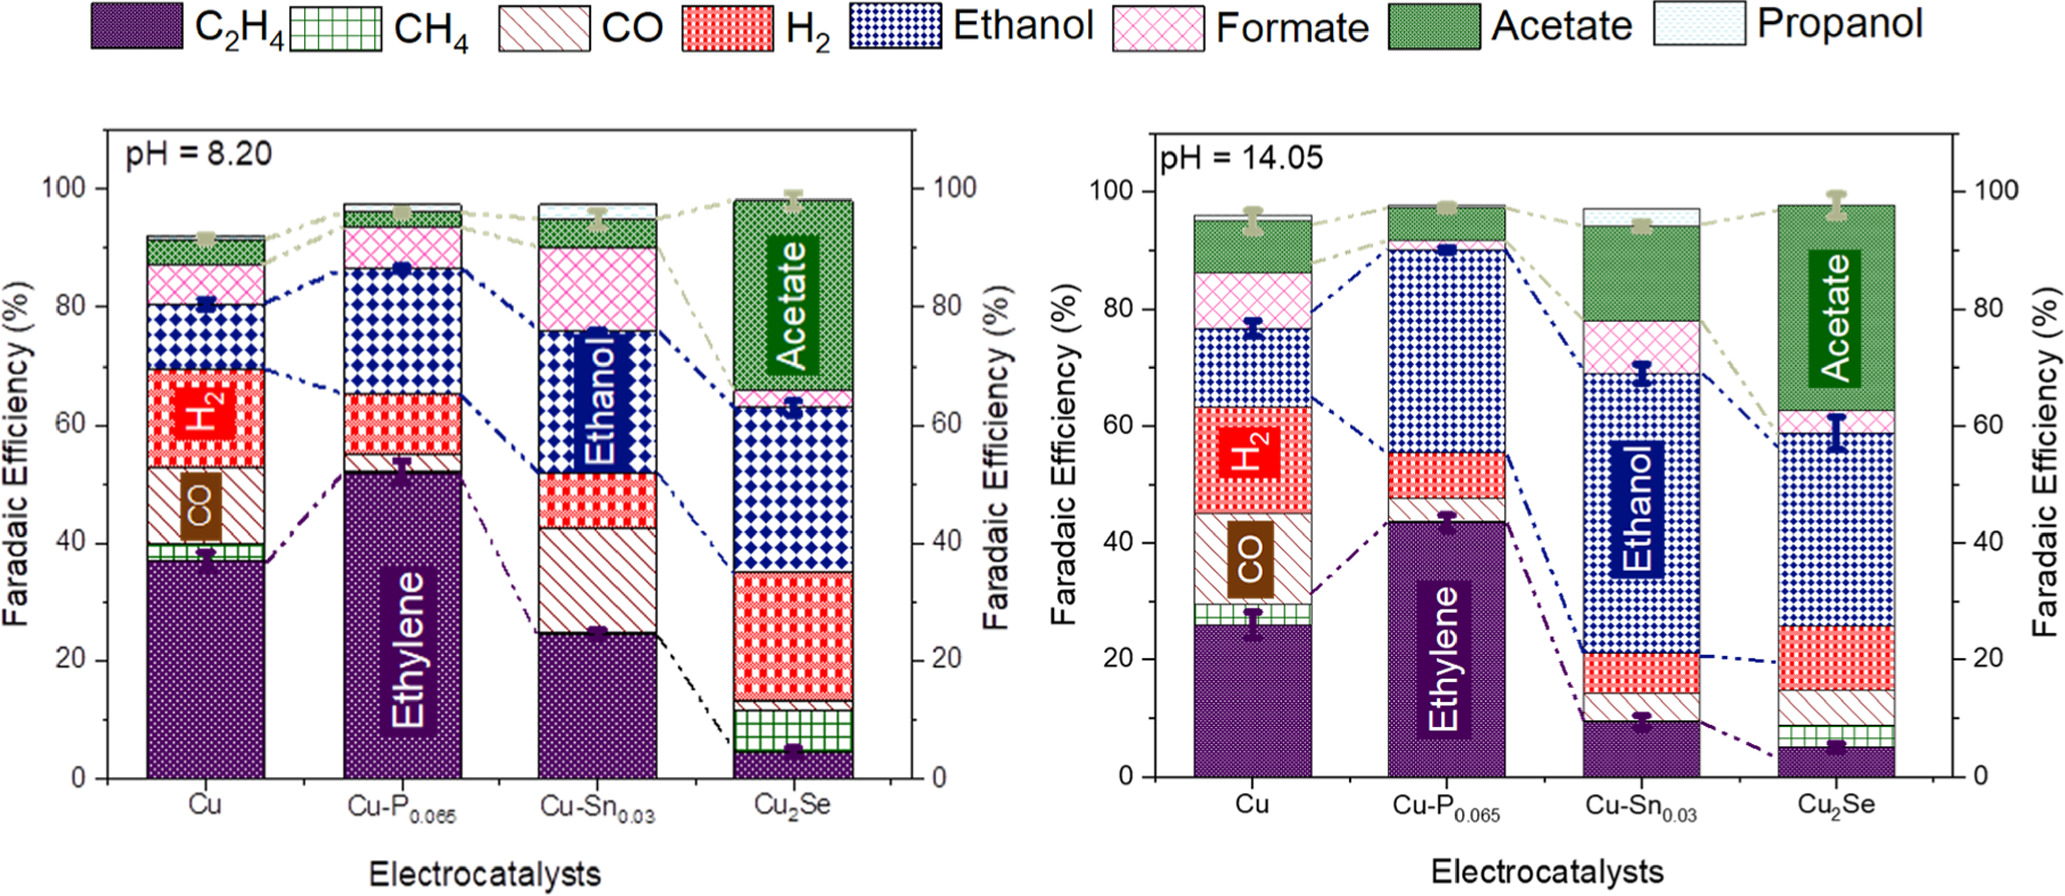 Faradaic efficiencies of CO2 reduction products on the Cu, Cu-P0.065, Cu-Sn0.03, and Cu2Se electrocatalysts at a constant cell potential of 4.0 V (Left) 0.1 M KHCO3 (pH = 8.20) and (Right) 1 M KOH (pH = 14.05). Error bars represent the standard deviation from triplicate measurements on each electrocatalyst under identical testing conditions. The small error bars verify the reproducibility of the CO2 reduction and observed trends in faradaic efficiency across the undoped, Sn-doped, P-doped copper and Cu2Se electrocatalyst. (see details in the link provided below)